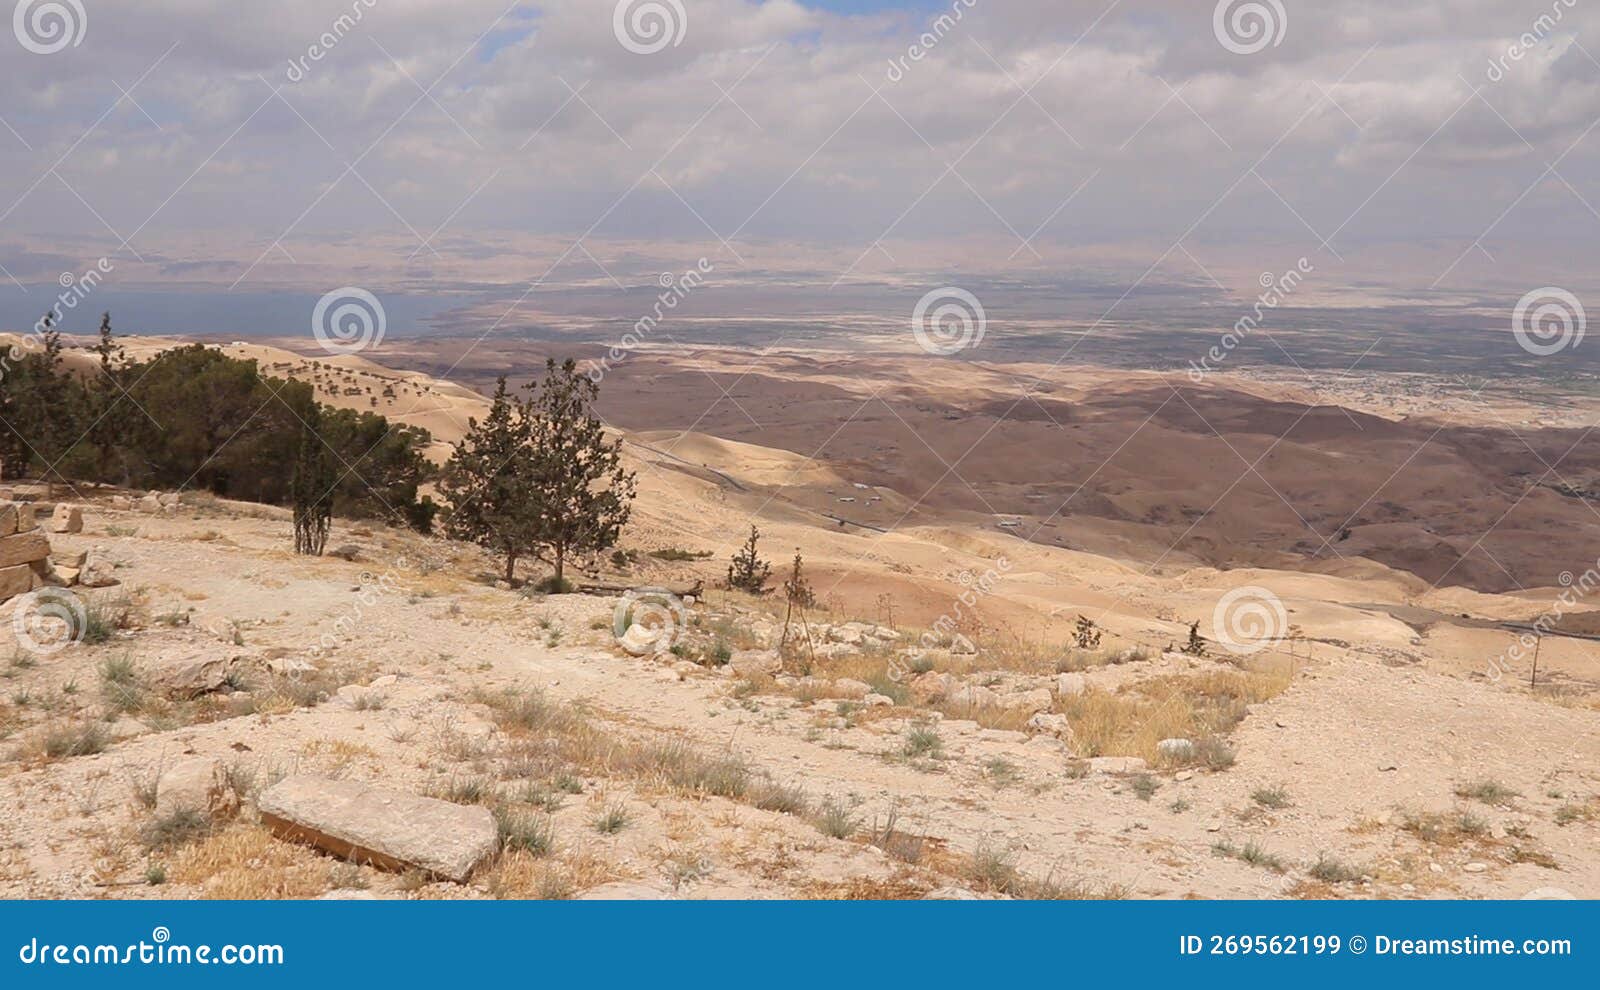 A View Of The Promised Land Mount Nebo Stock Image Image Of Nature